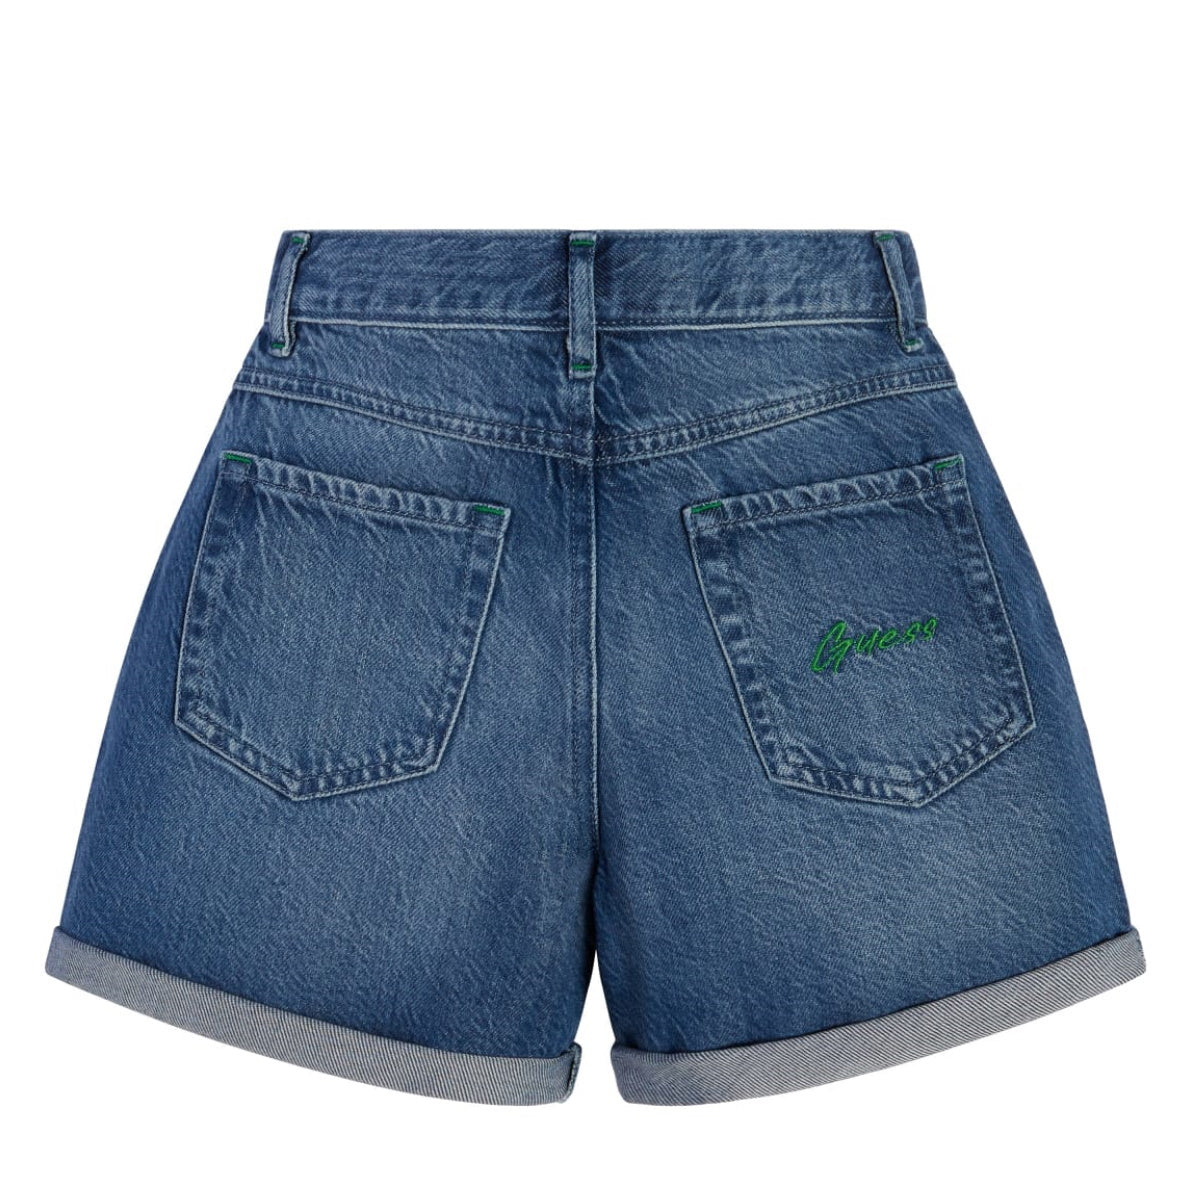 Guess shorts jeans baby